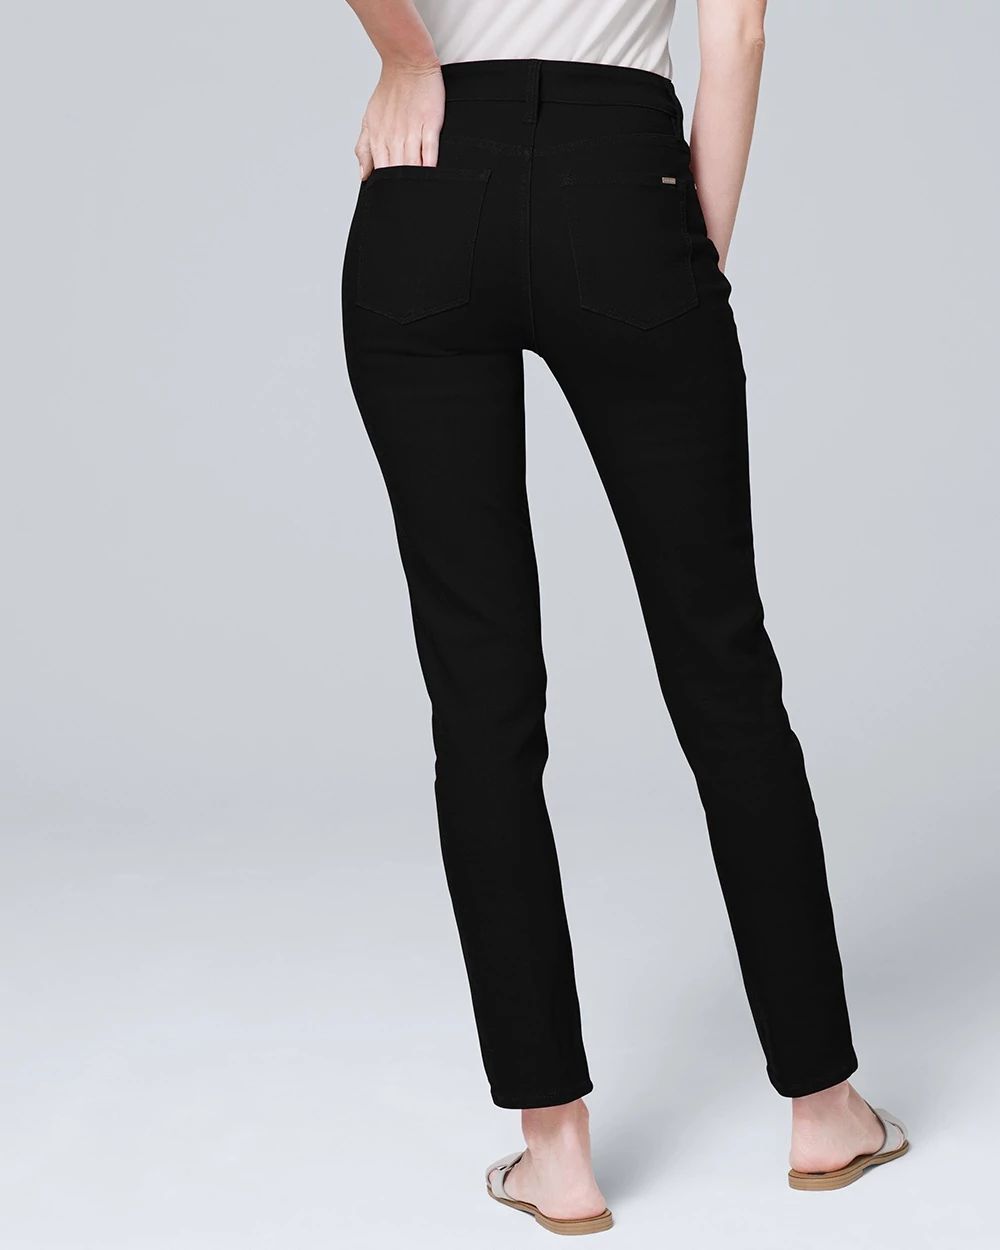 High-Rise Sculpt Straight Crop Jeans click to view larger image.